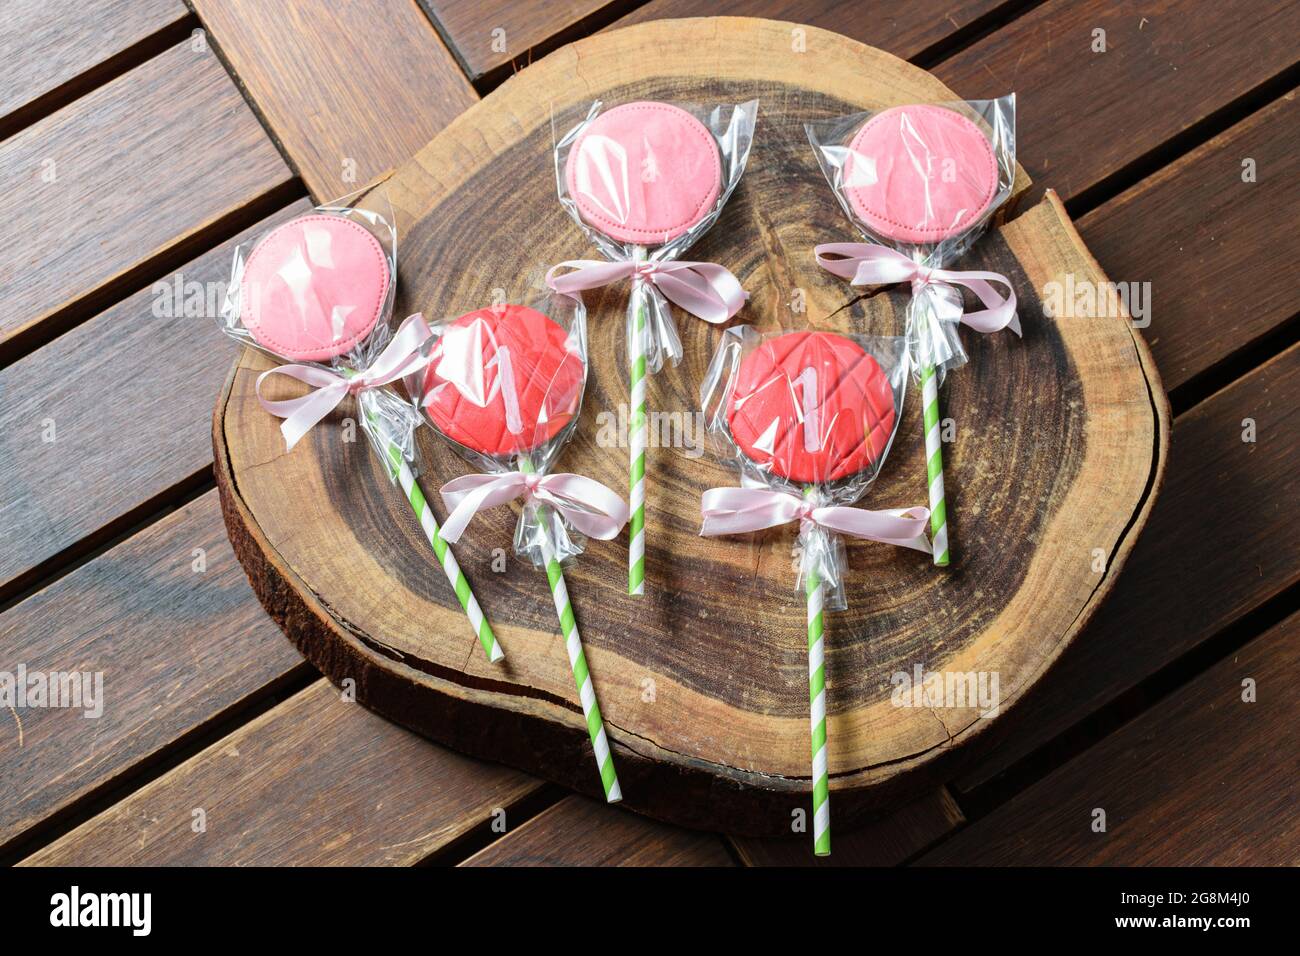 5 strawberry chocolate lollipops on a wooden log board. Stock Photo